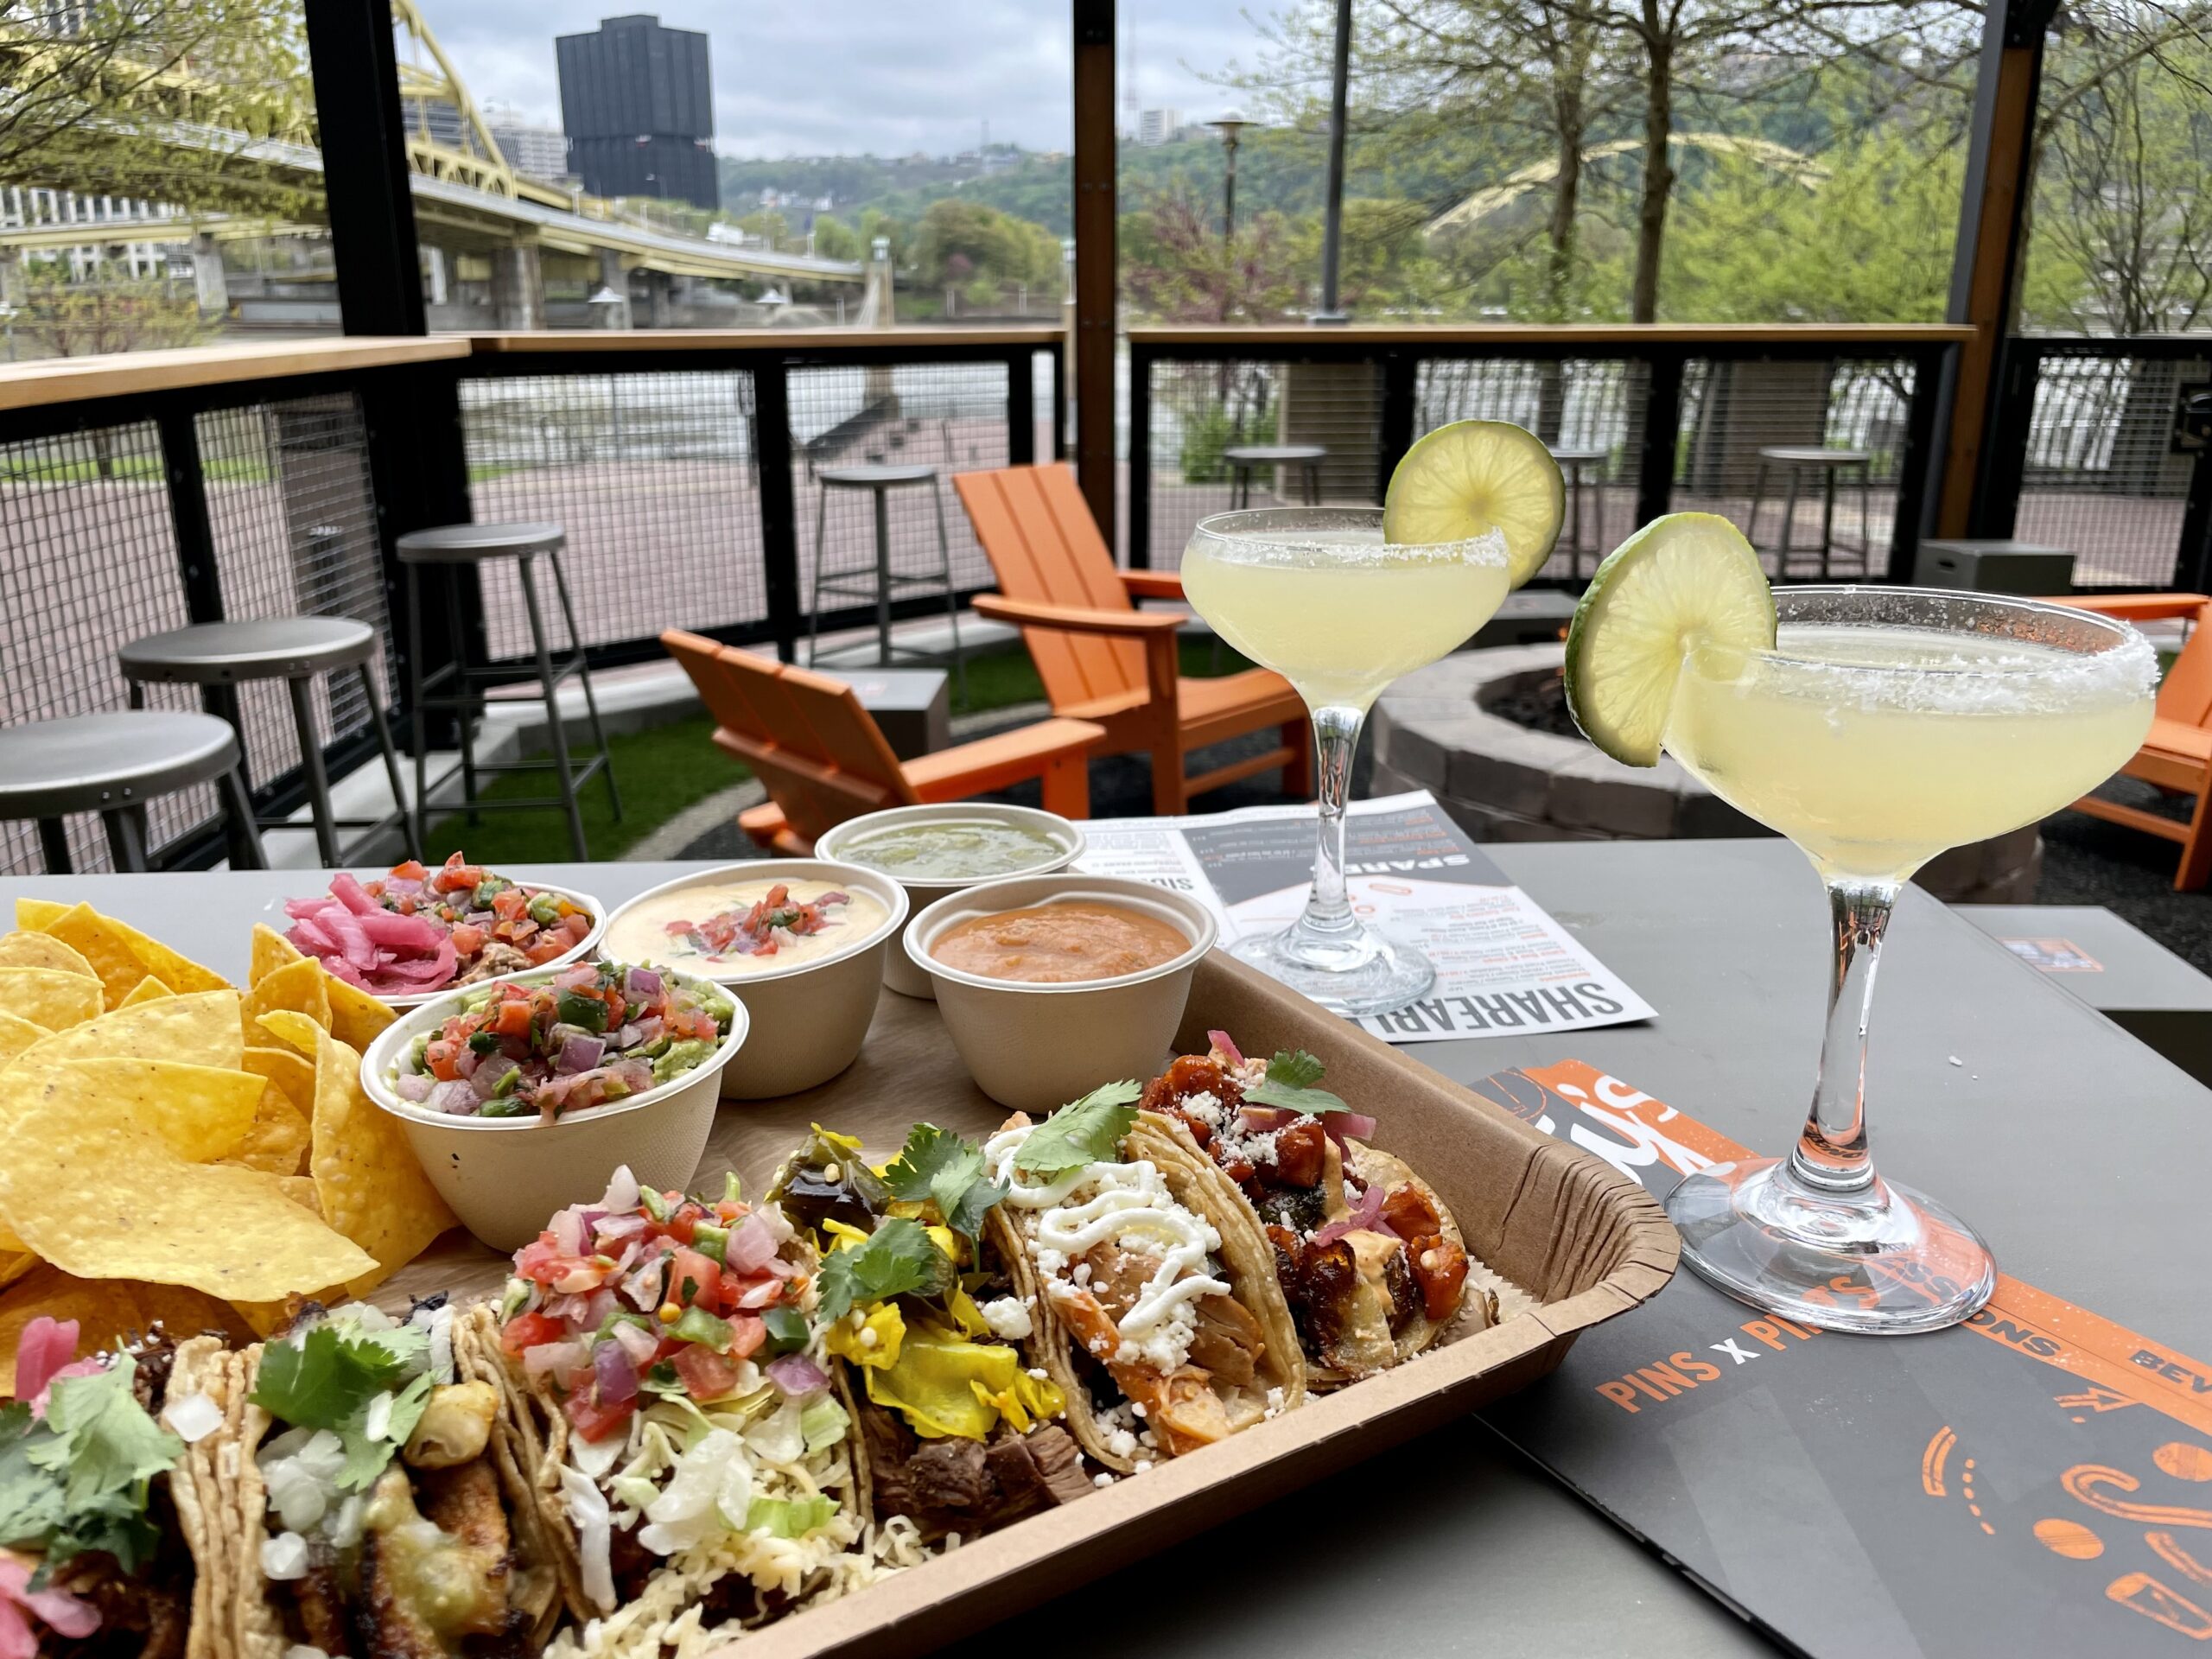 A photo at the North Shore Shorty's location, looking out at the river and bridges. There is a large assortment of tacos, dips, and drinks on the table.